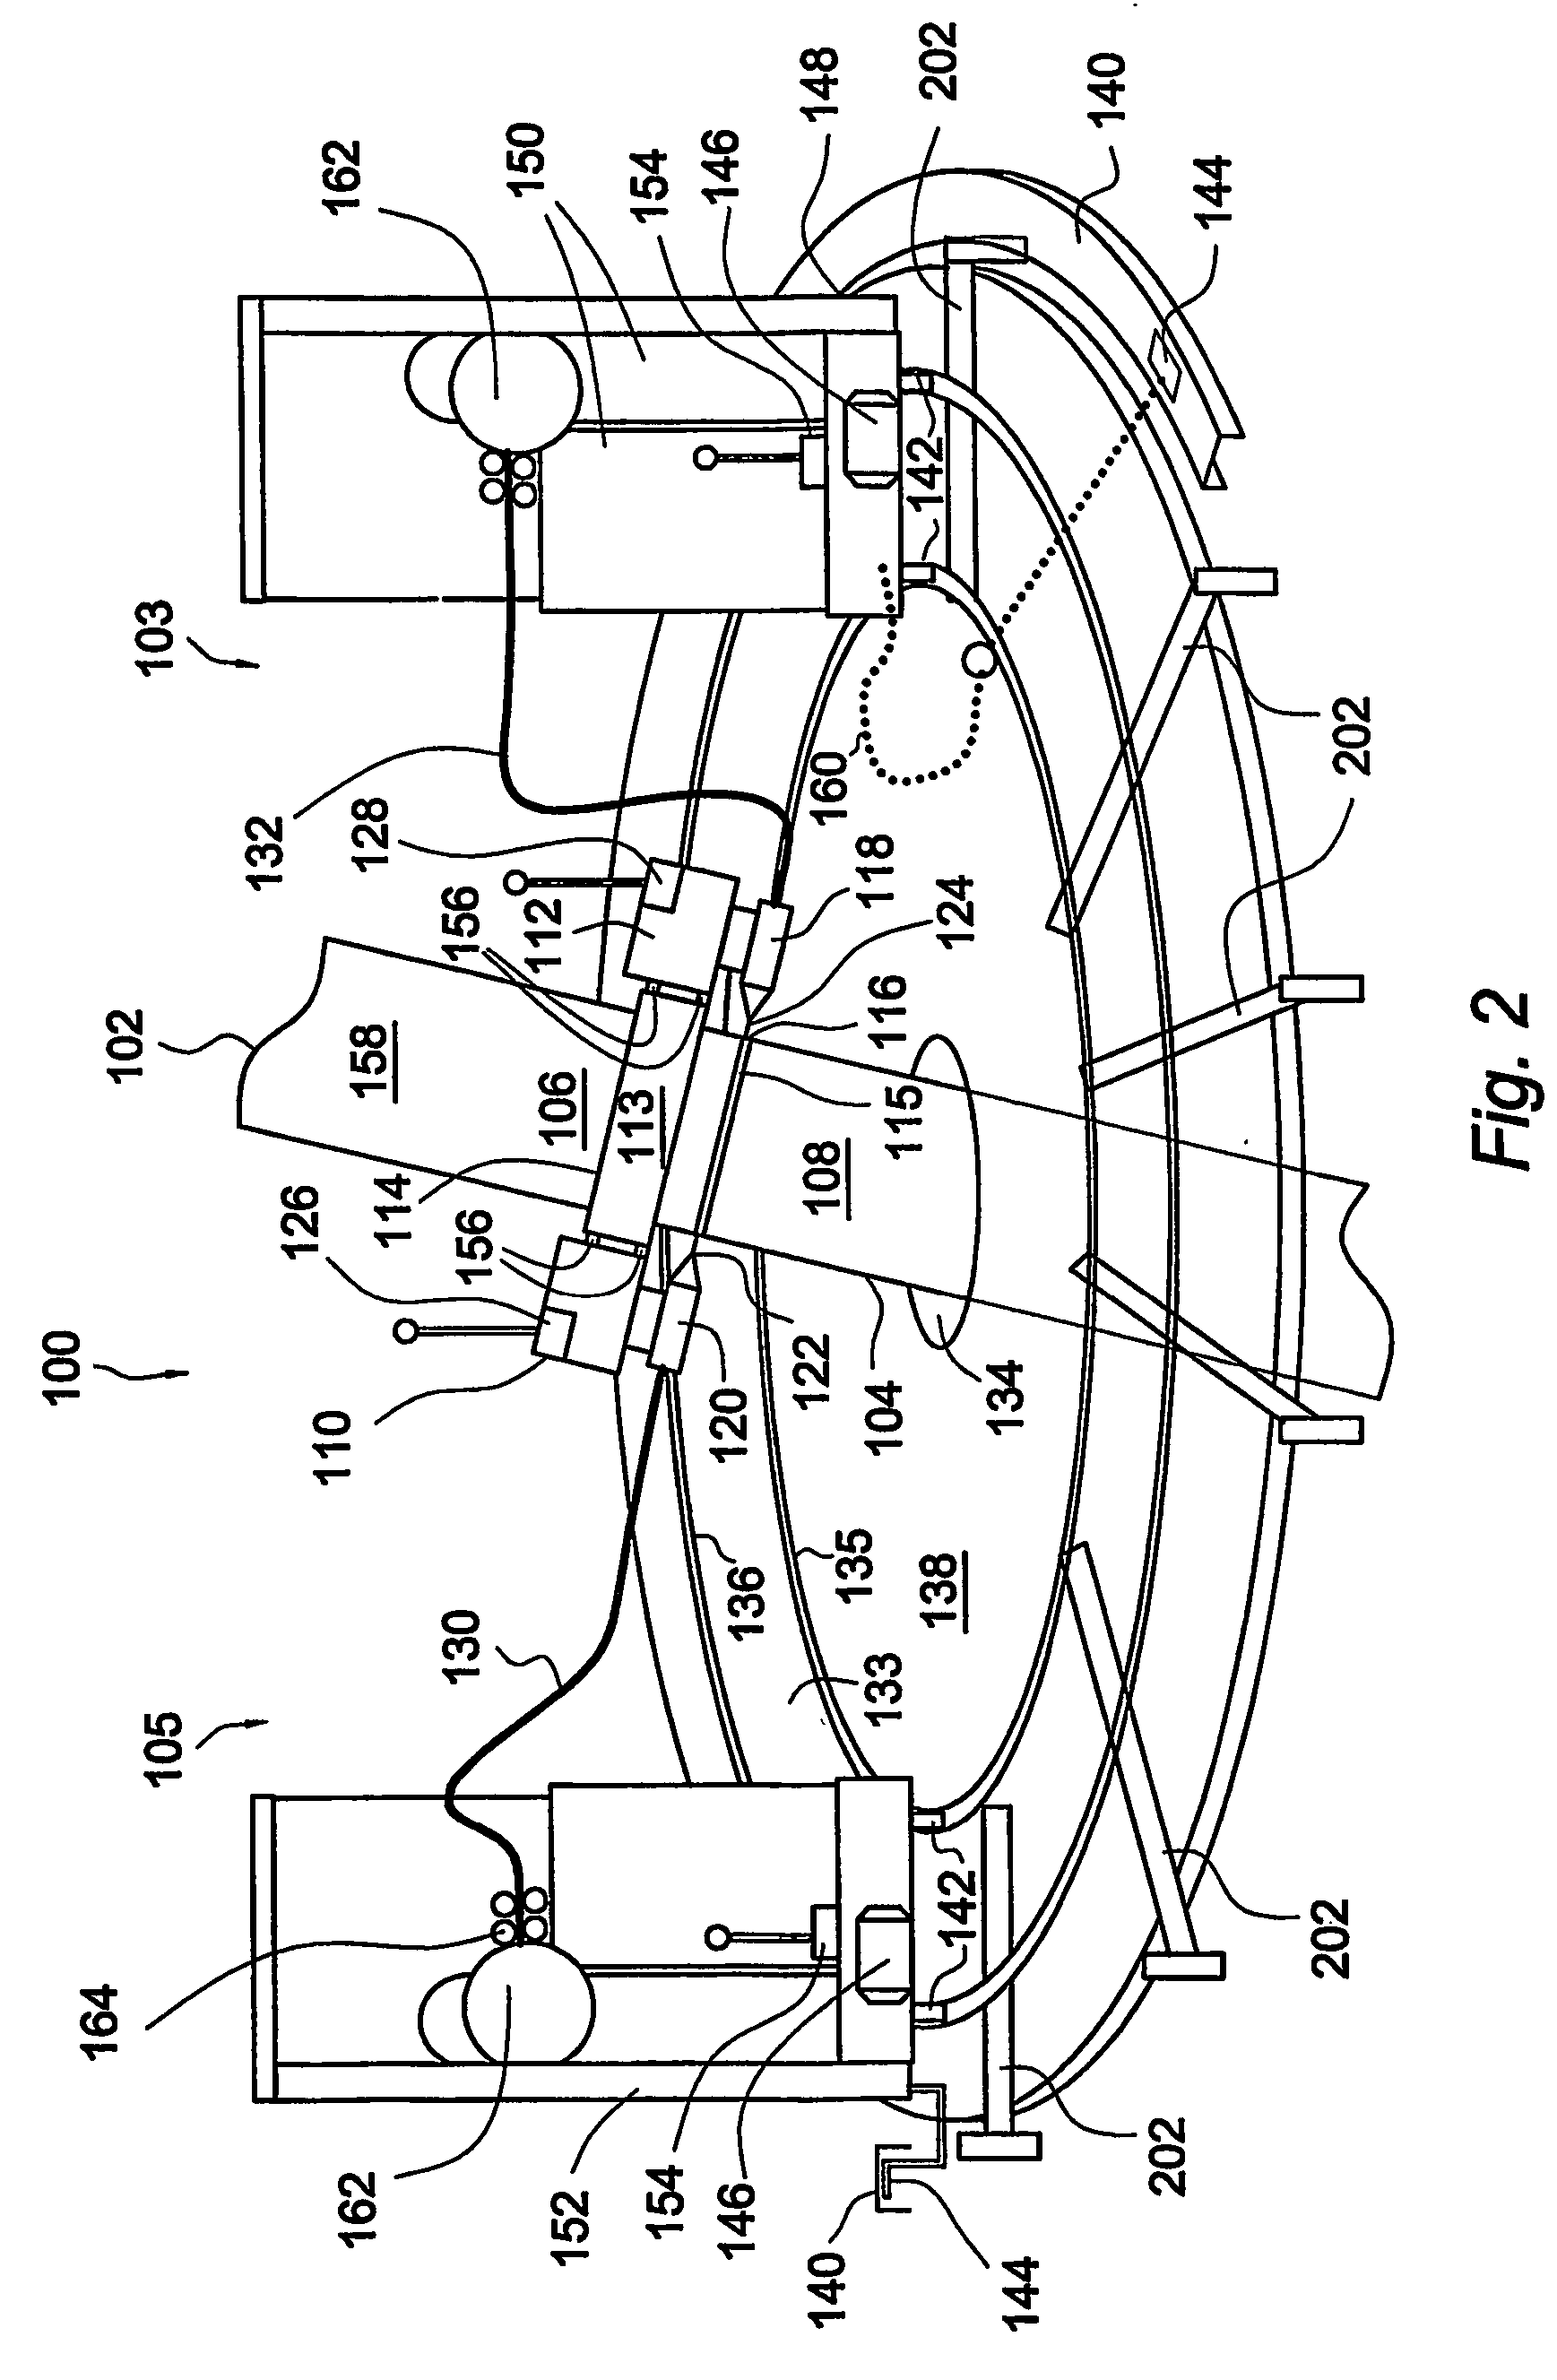 Apparatus and method for joining pipe ends together